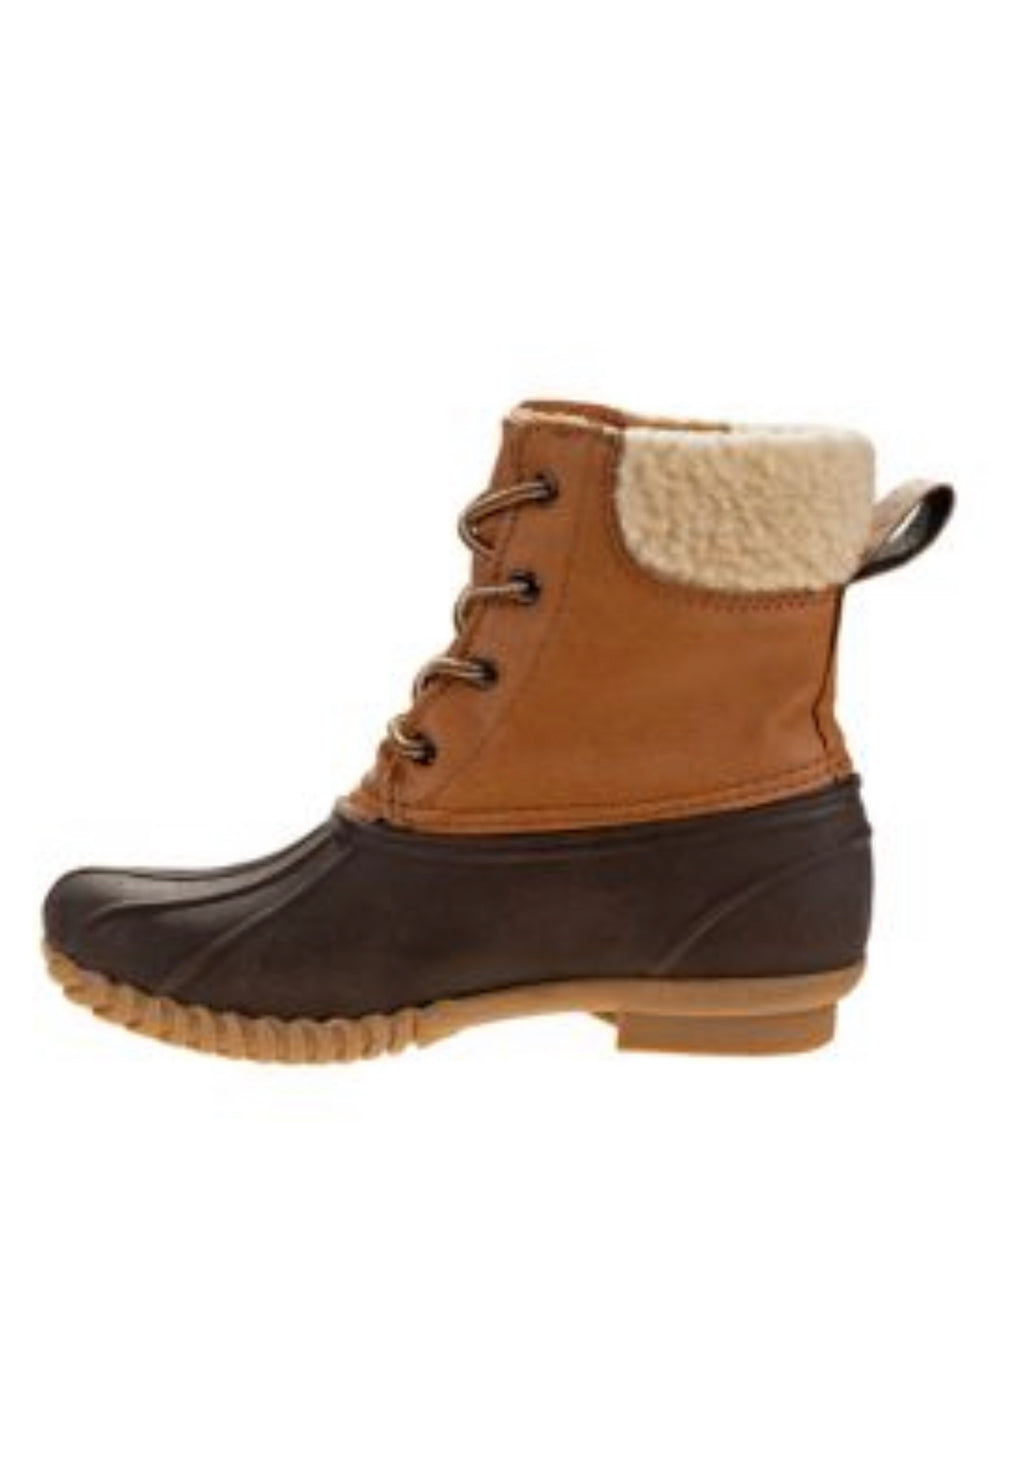 Josmo Duck Boots Tall Brown